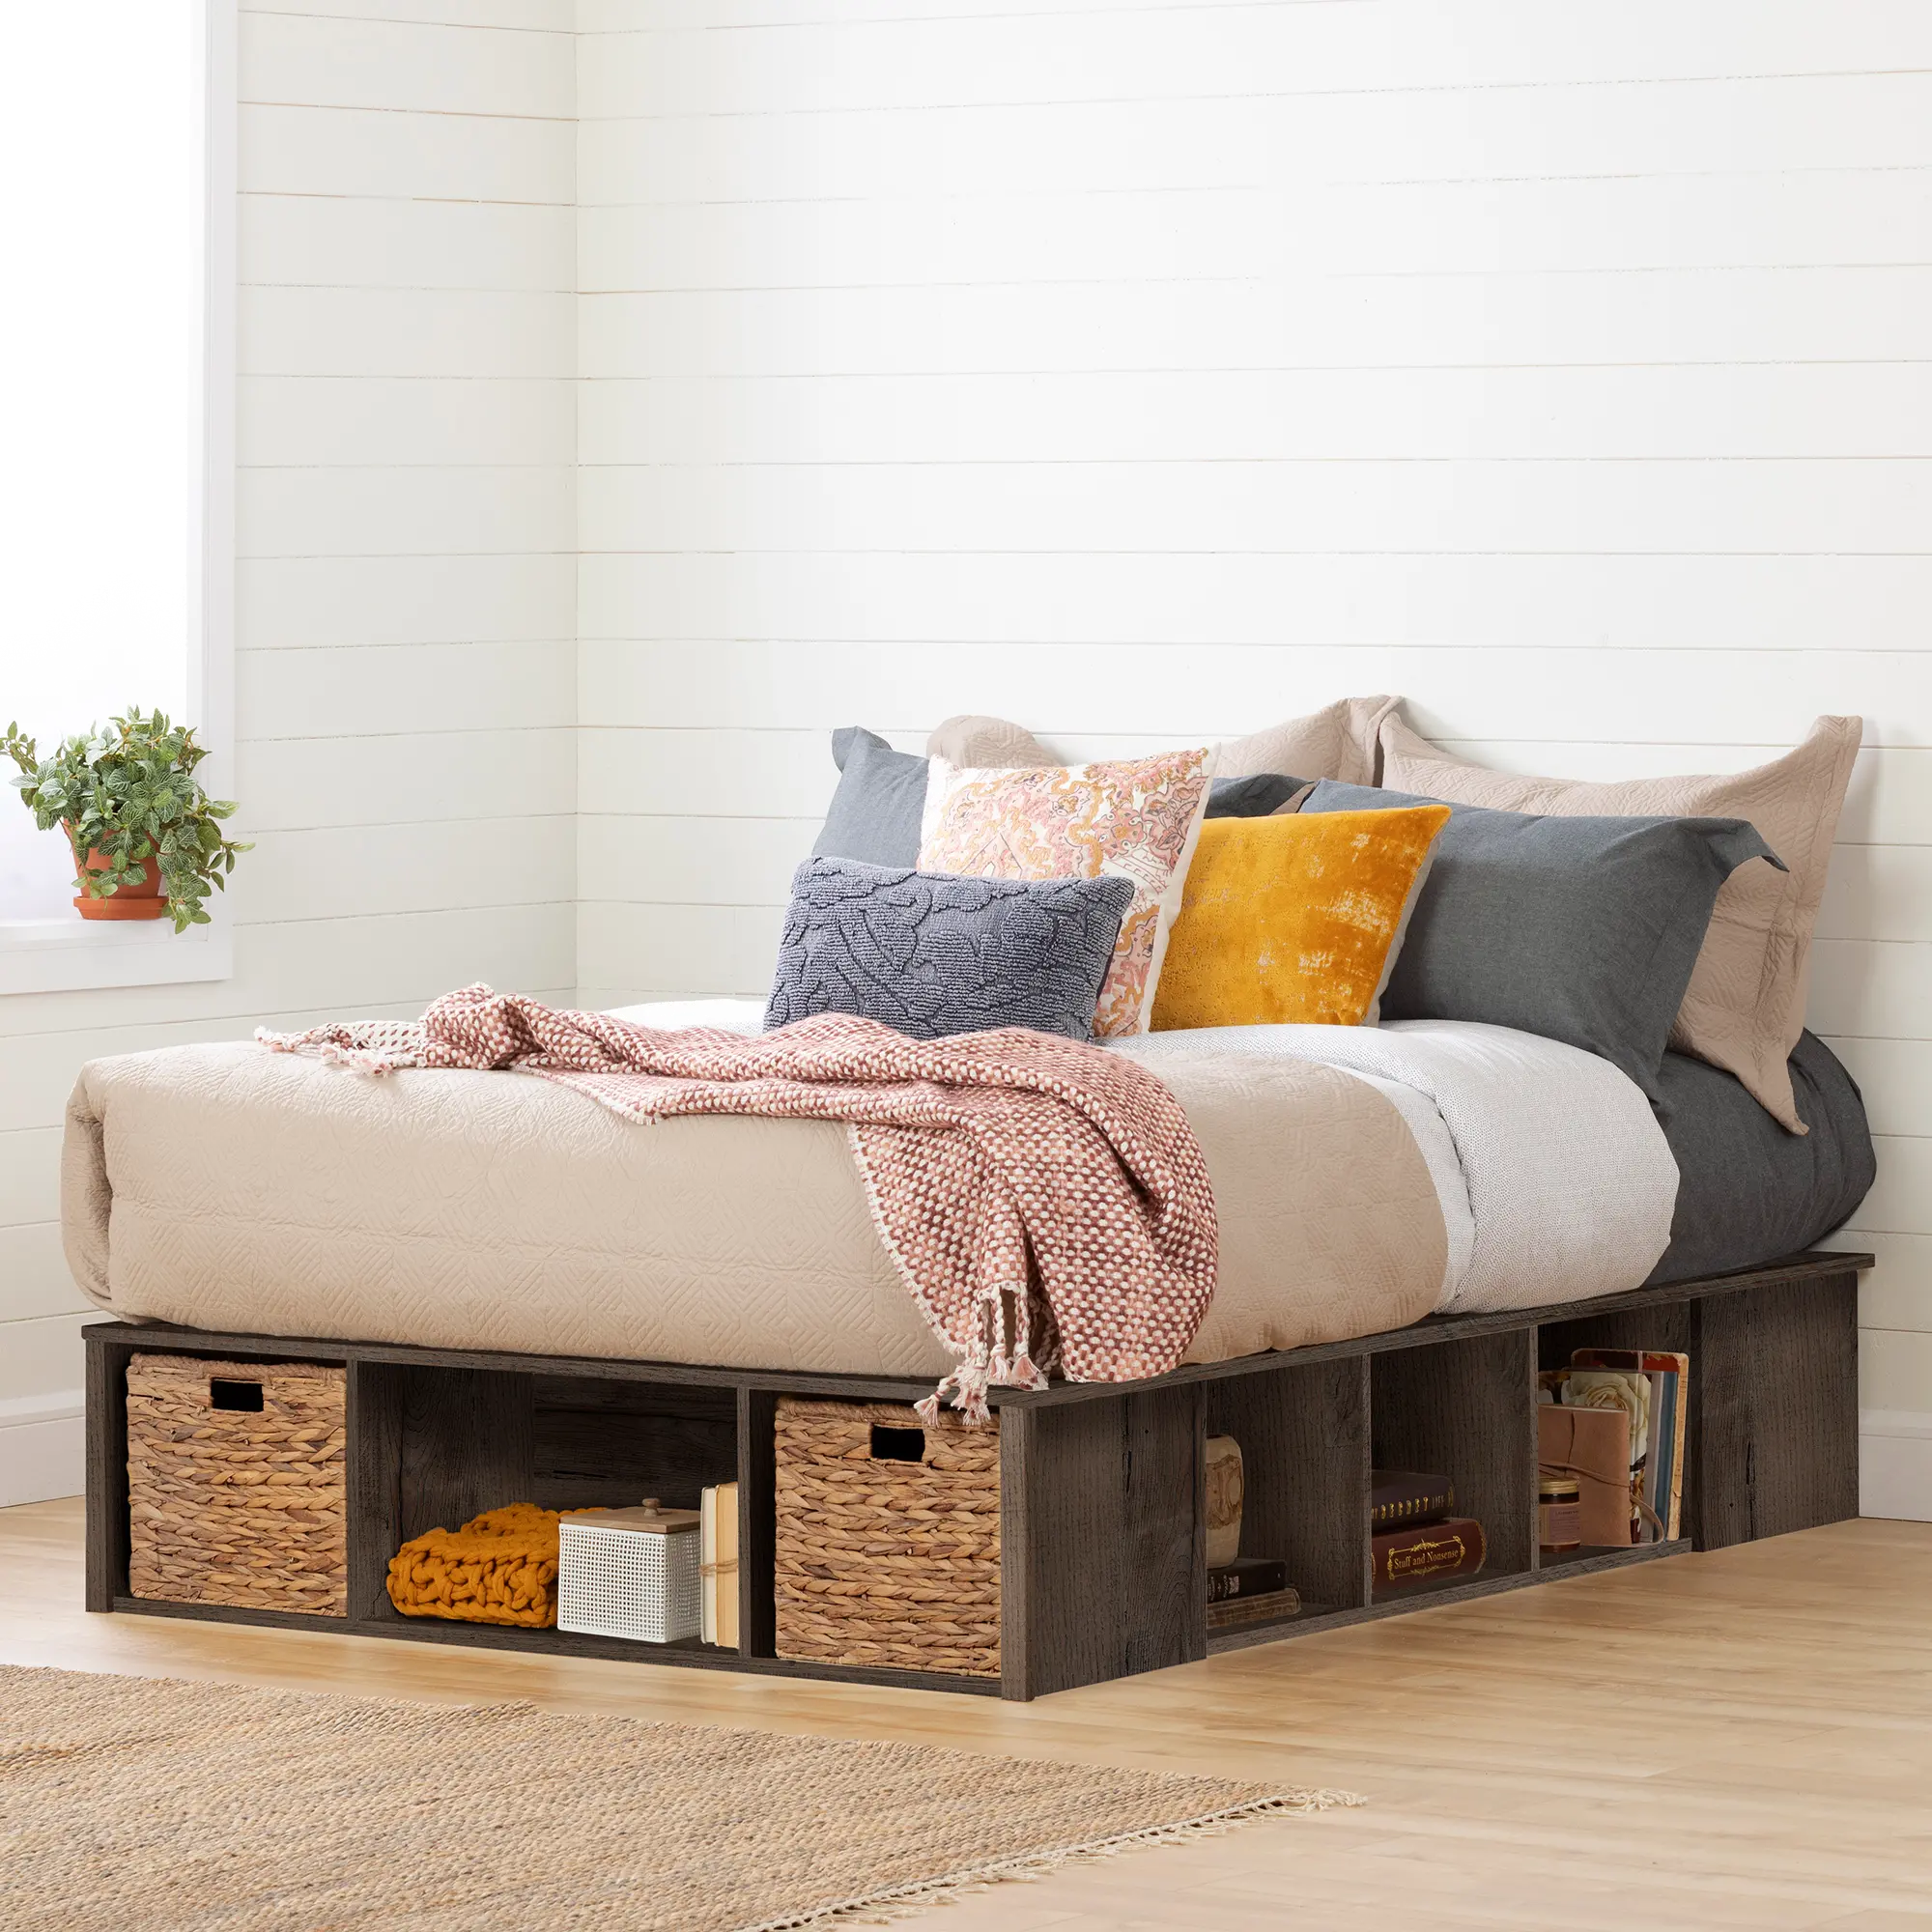 Fall Oak Full Storage Bed with Baskets - South Shore